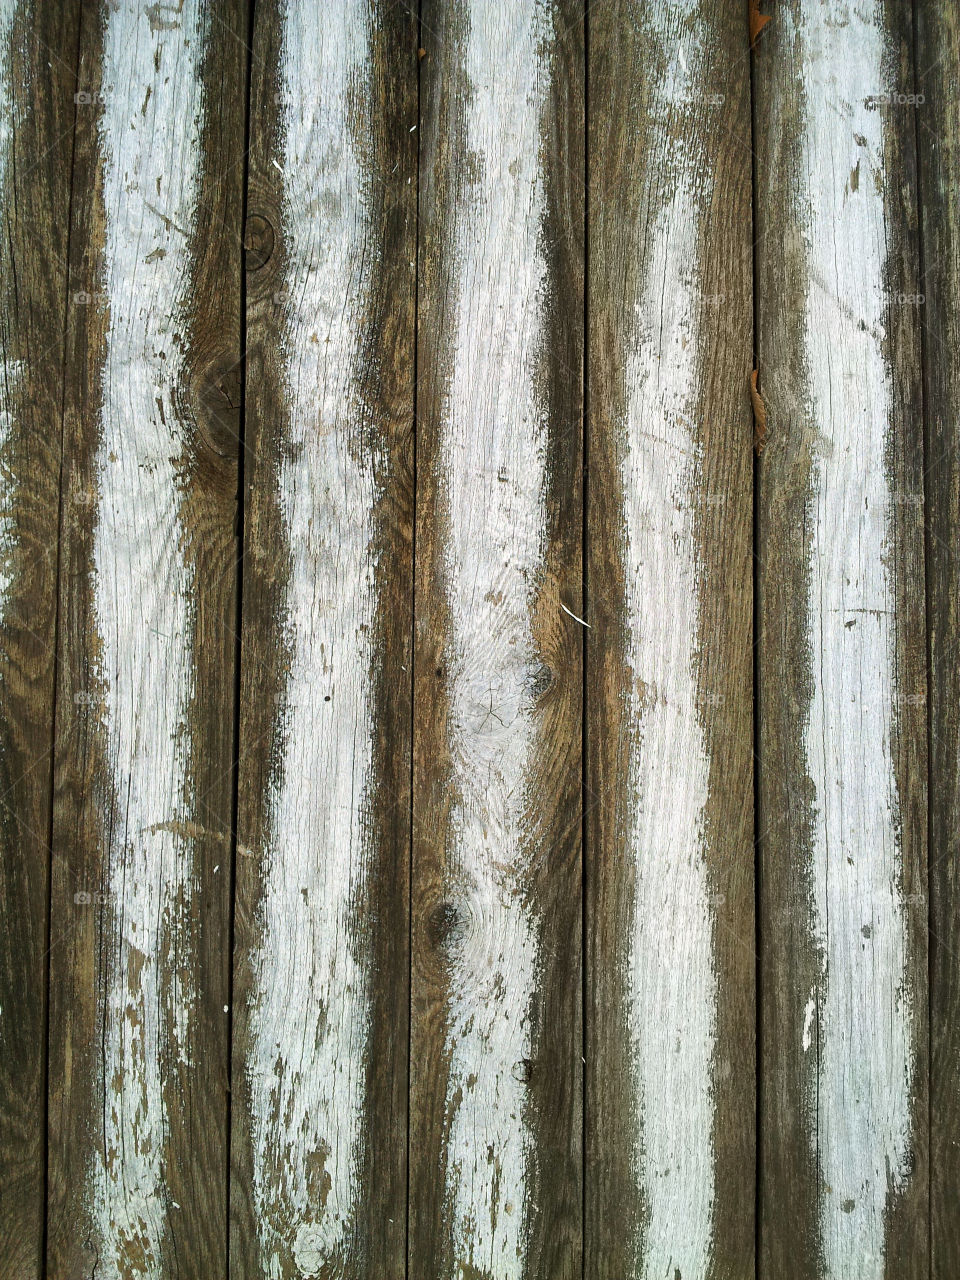 White painted lines faded on wood